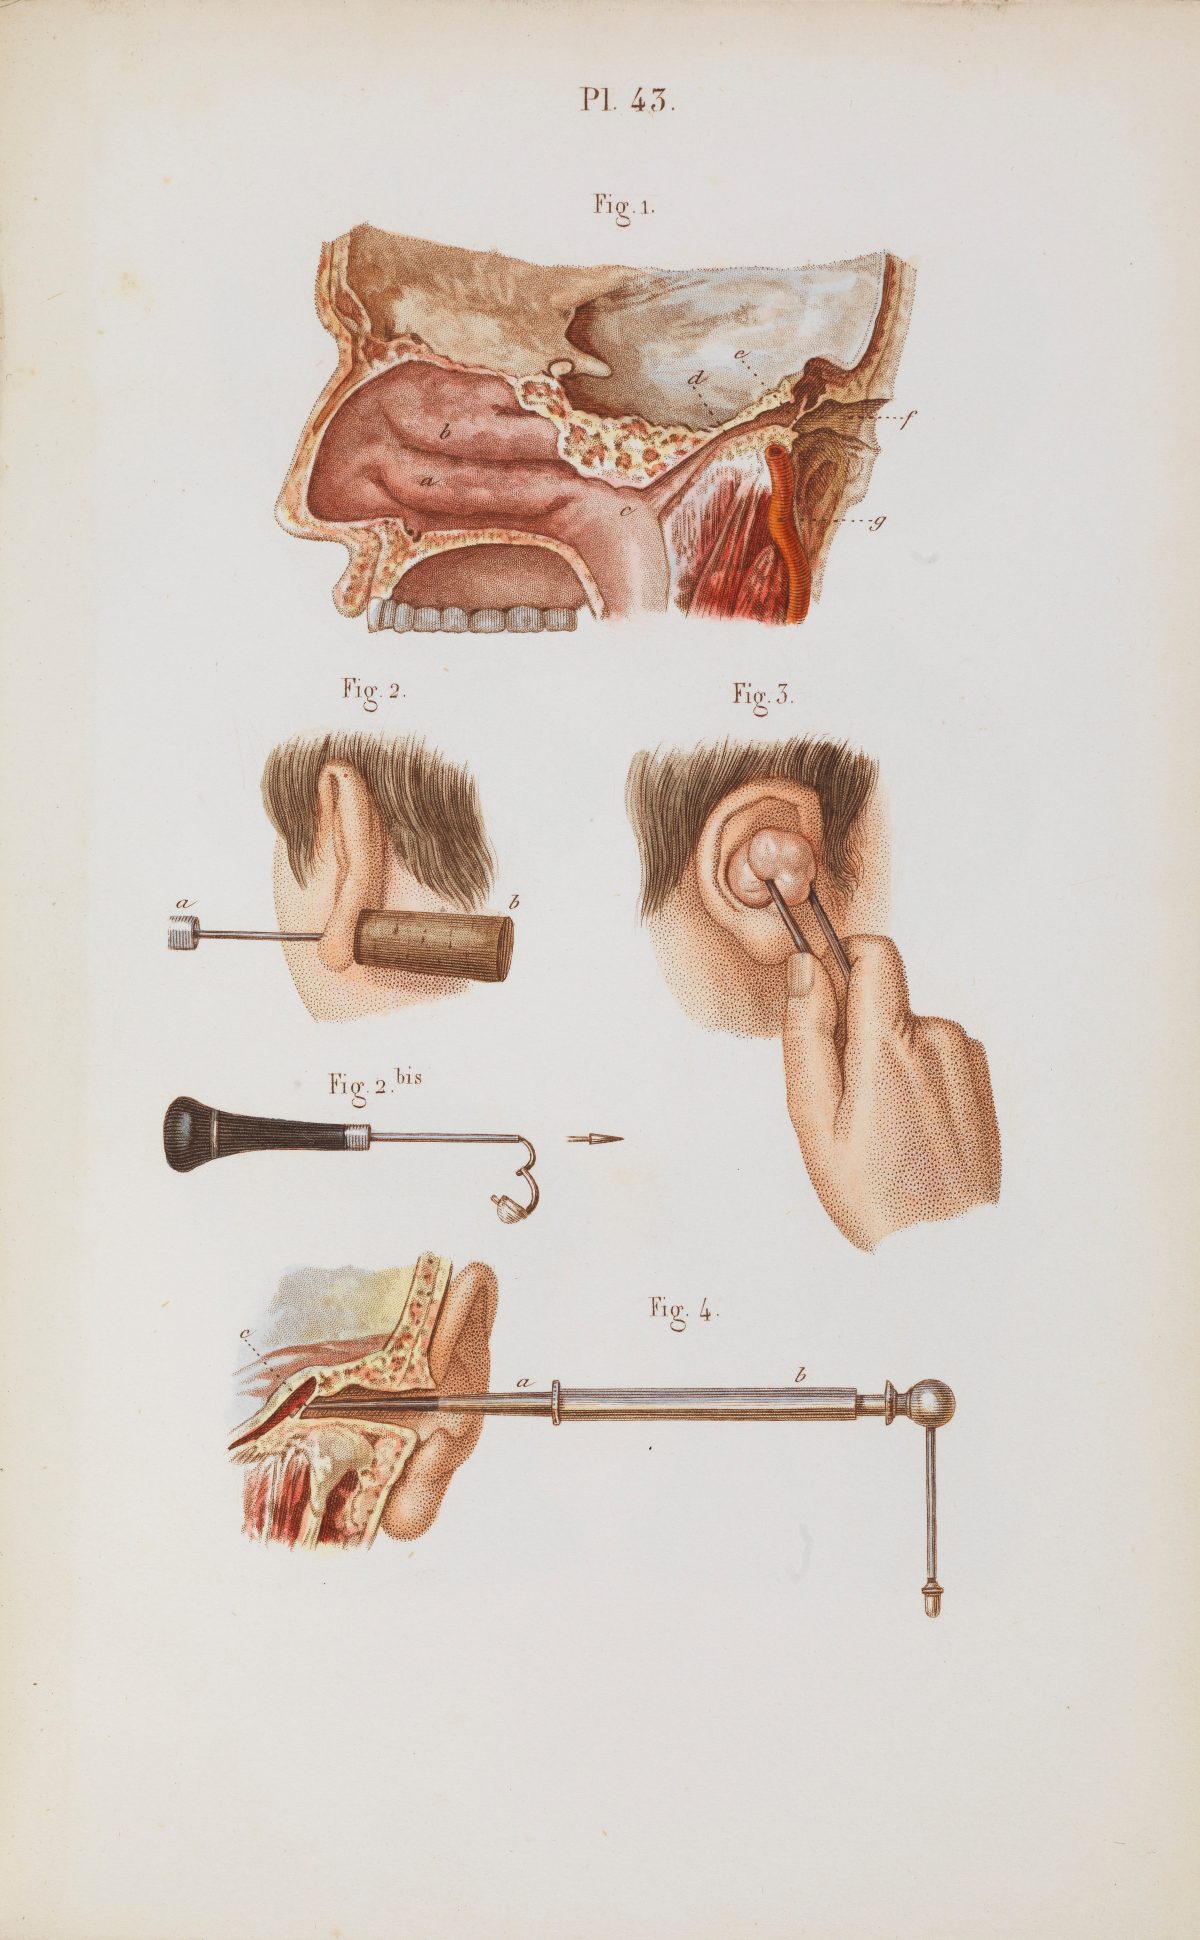 Plate 43, Illustration and anatomy of ear surgery.